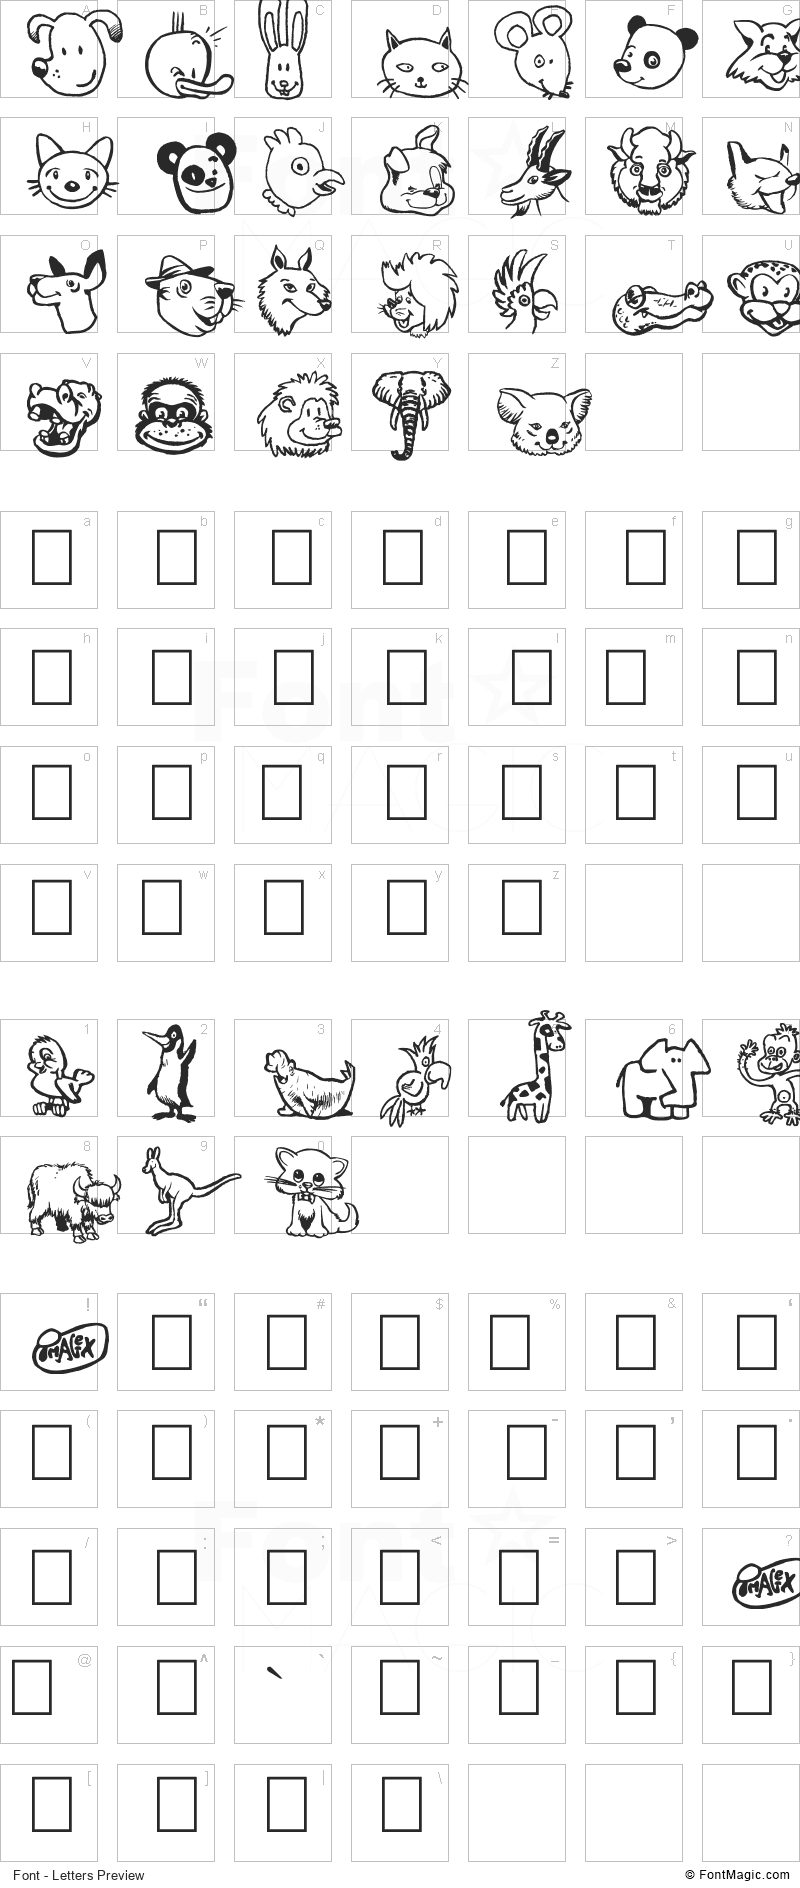 Toonimals Font - All Latters Preview Chart